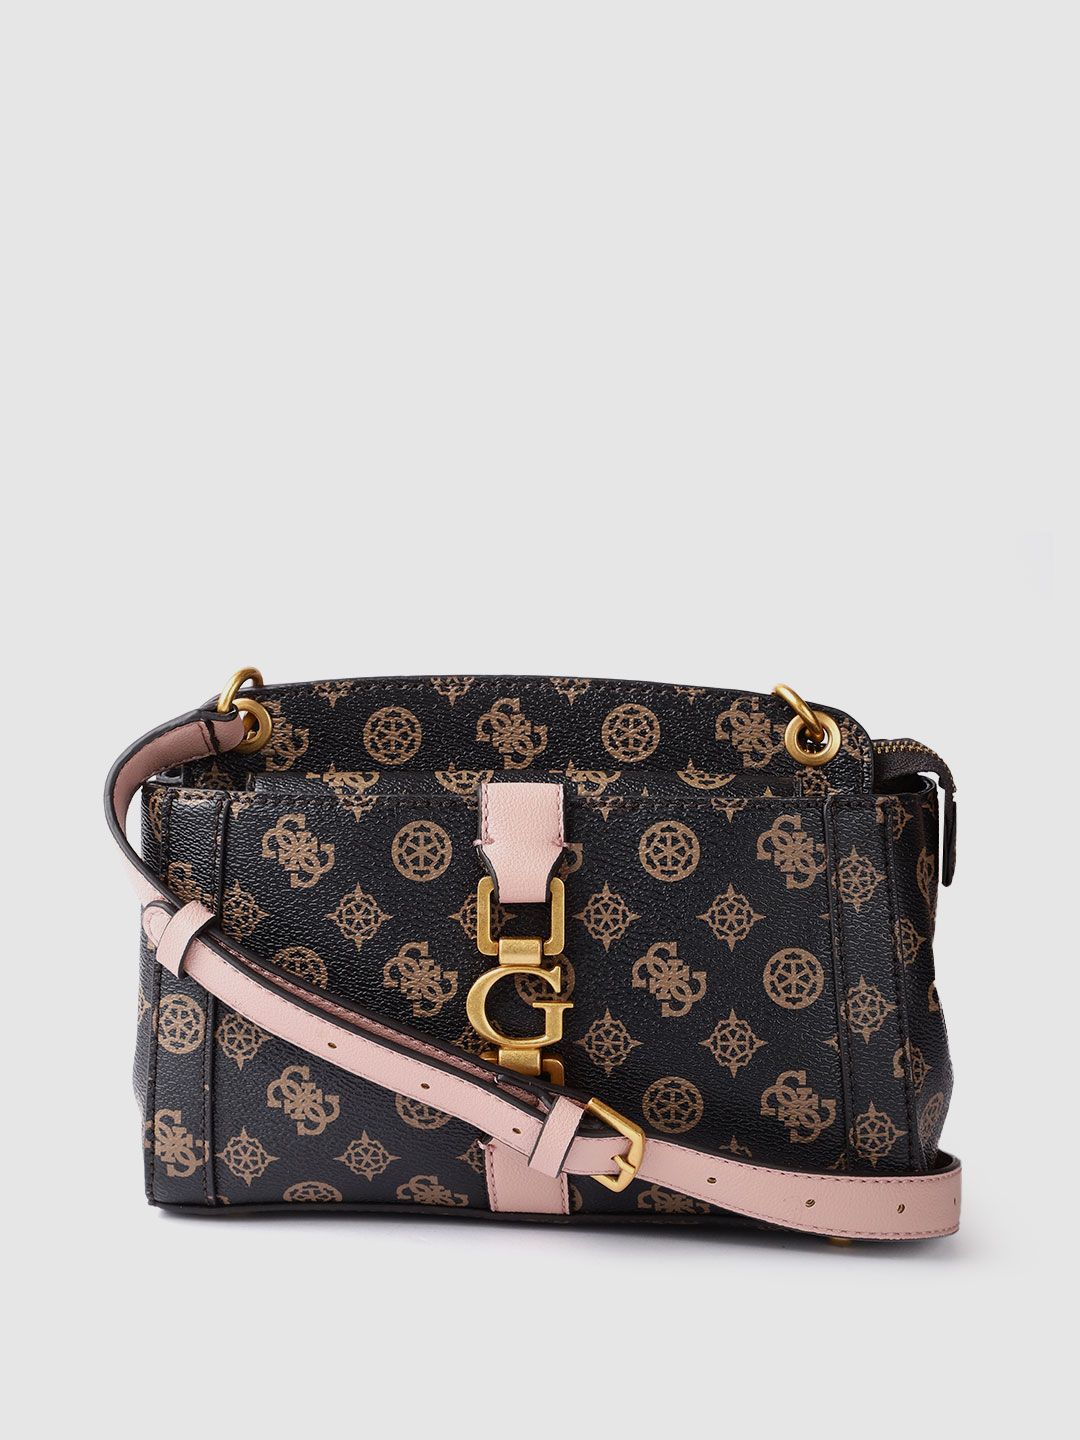 GUESS Brown Ethnic Motifs Printed Sling Bag with Non-Detachable Sling Strap Price in India